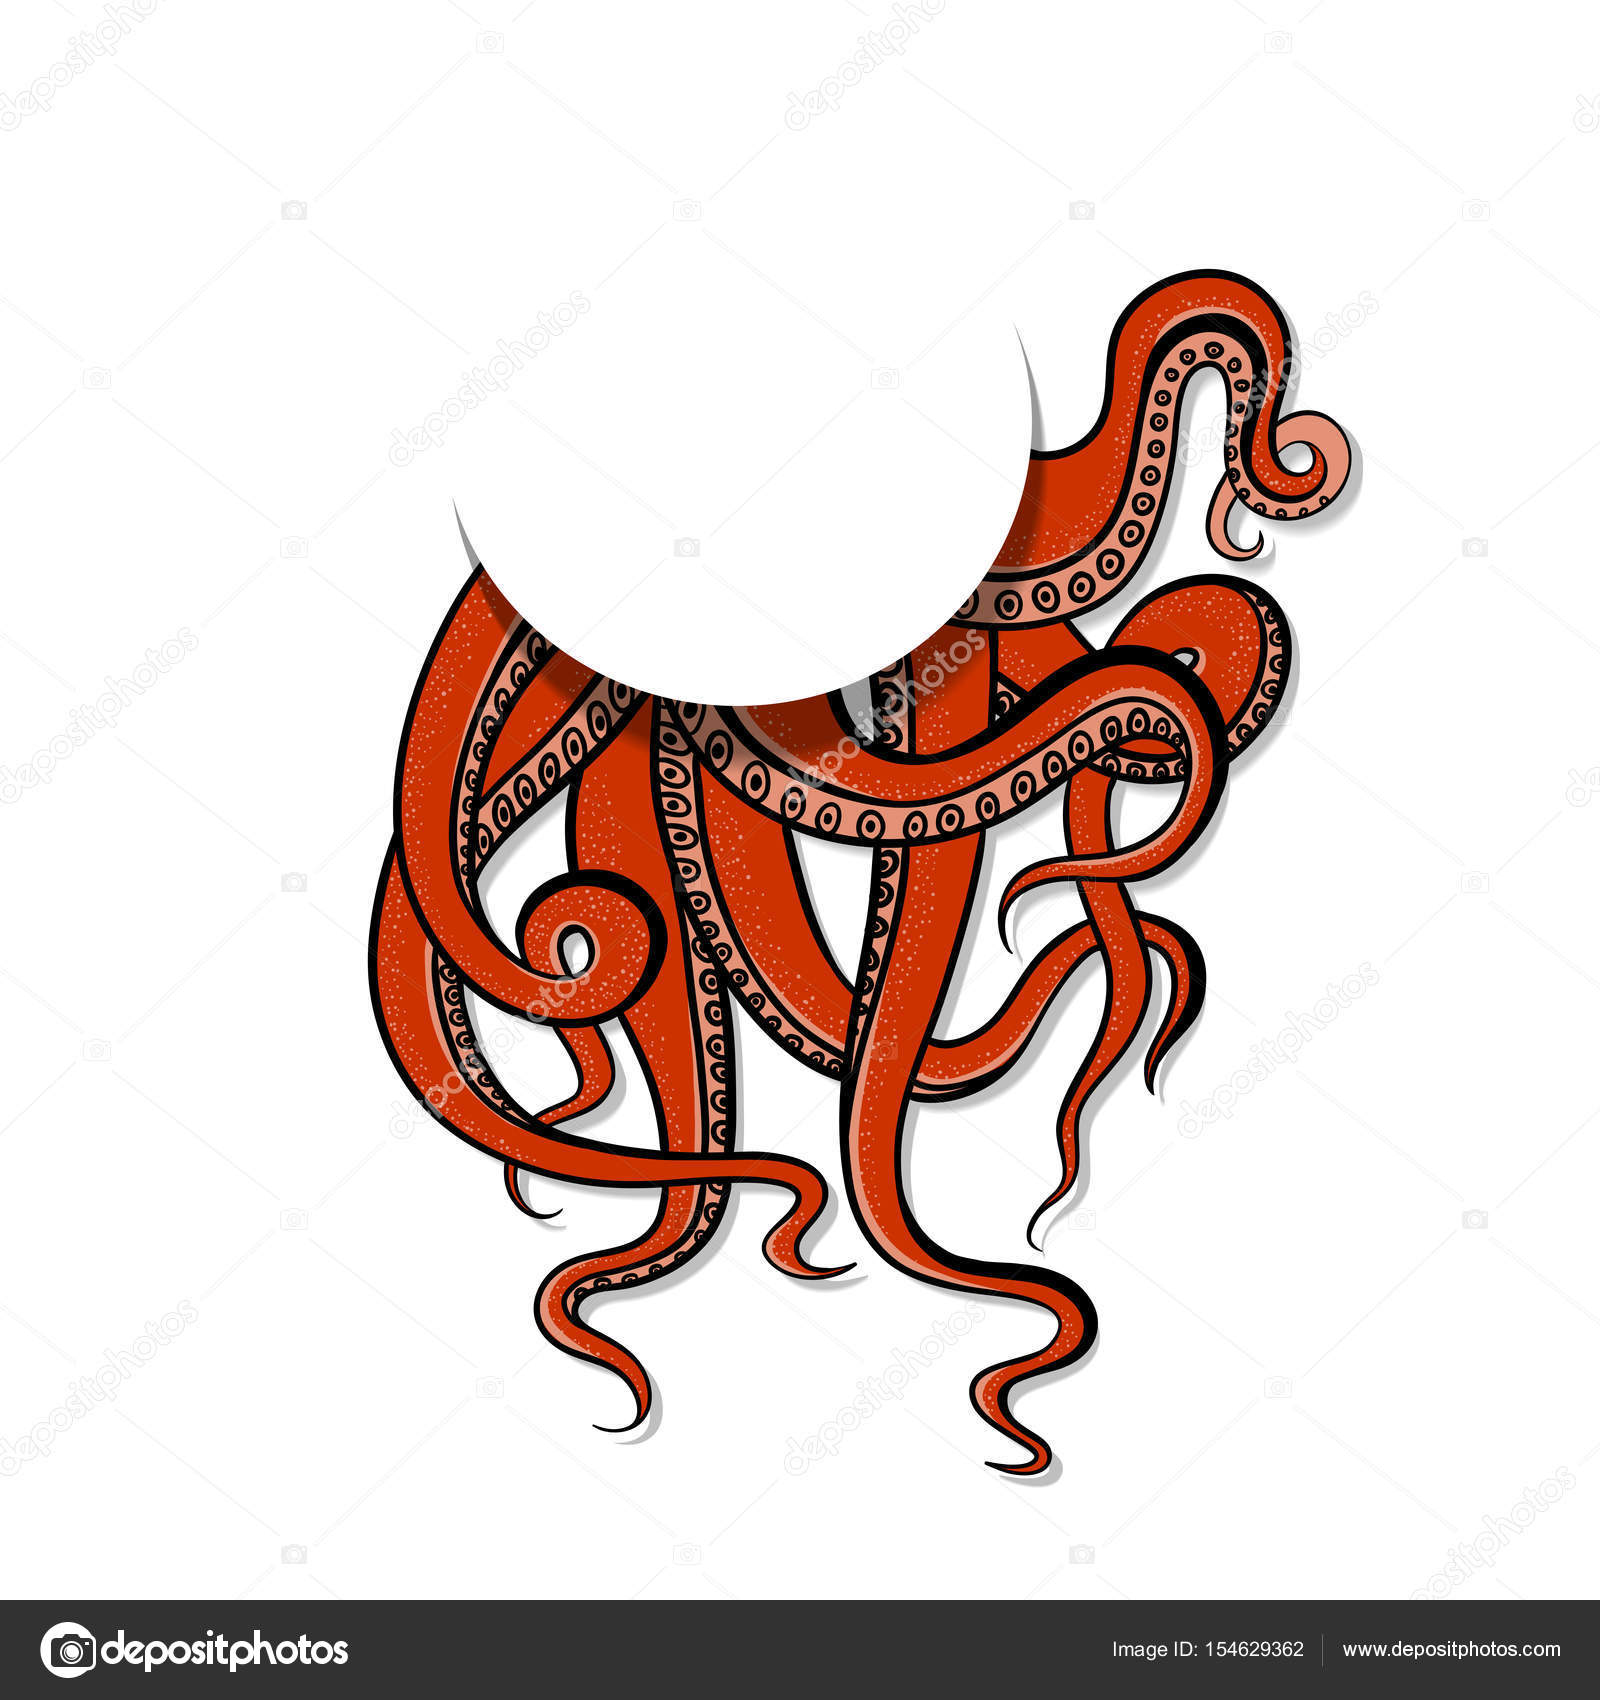 Octopus Tentacles Drawing at GetDrawings.com | Free for personal use ...